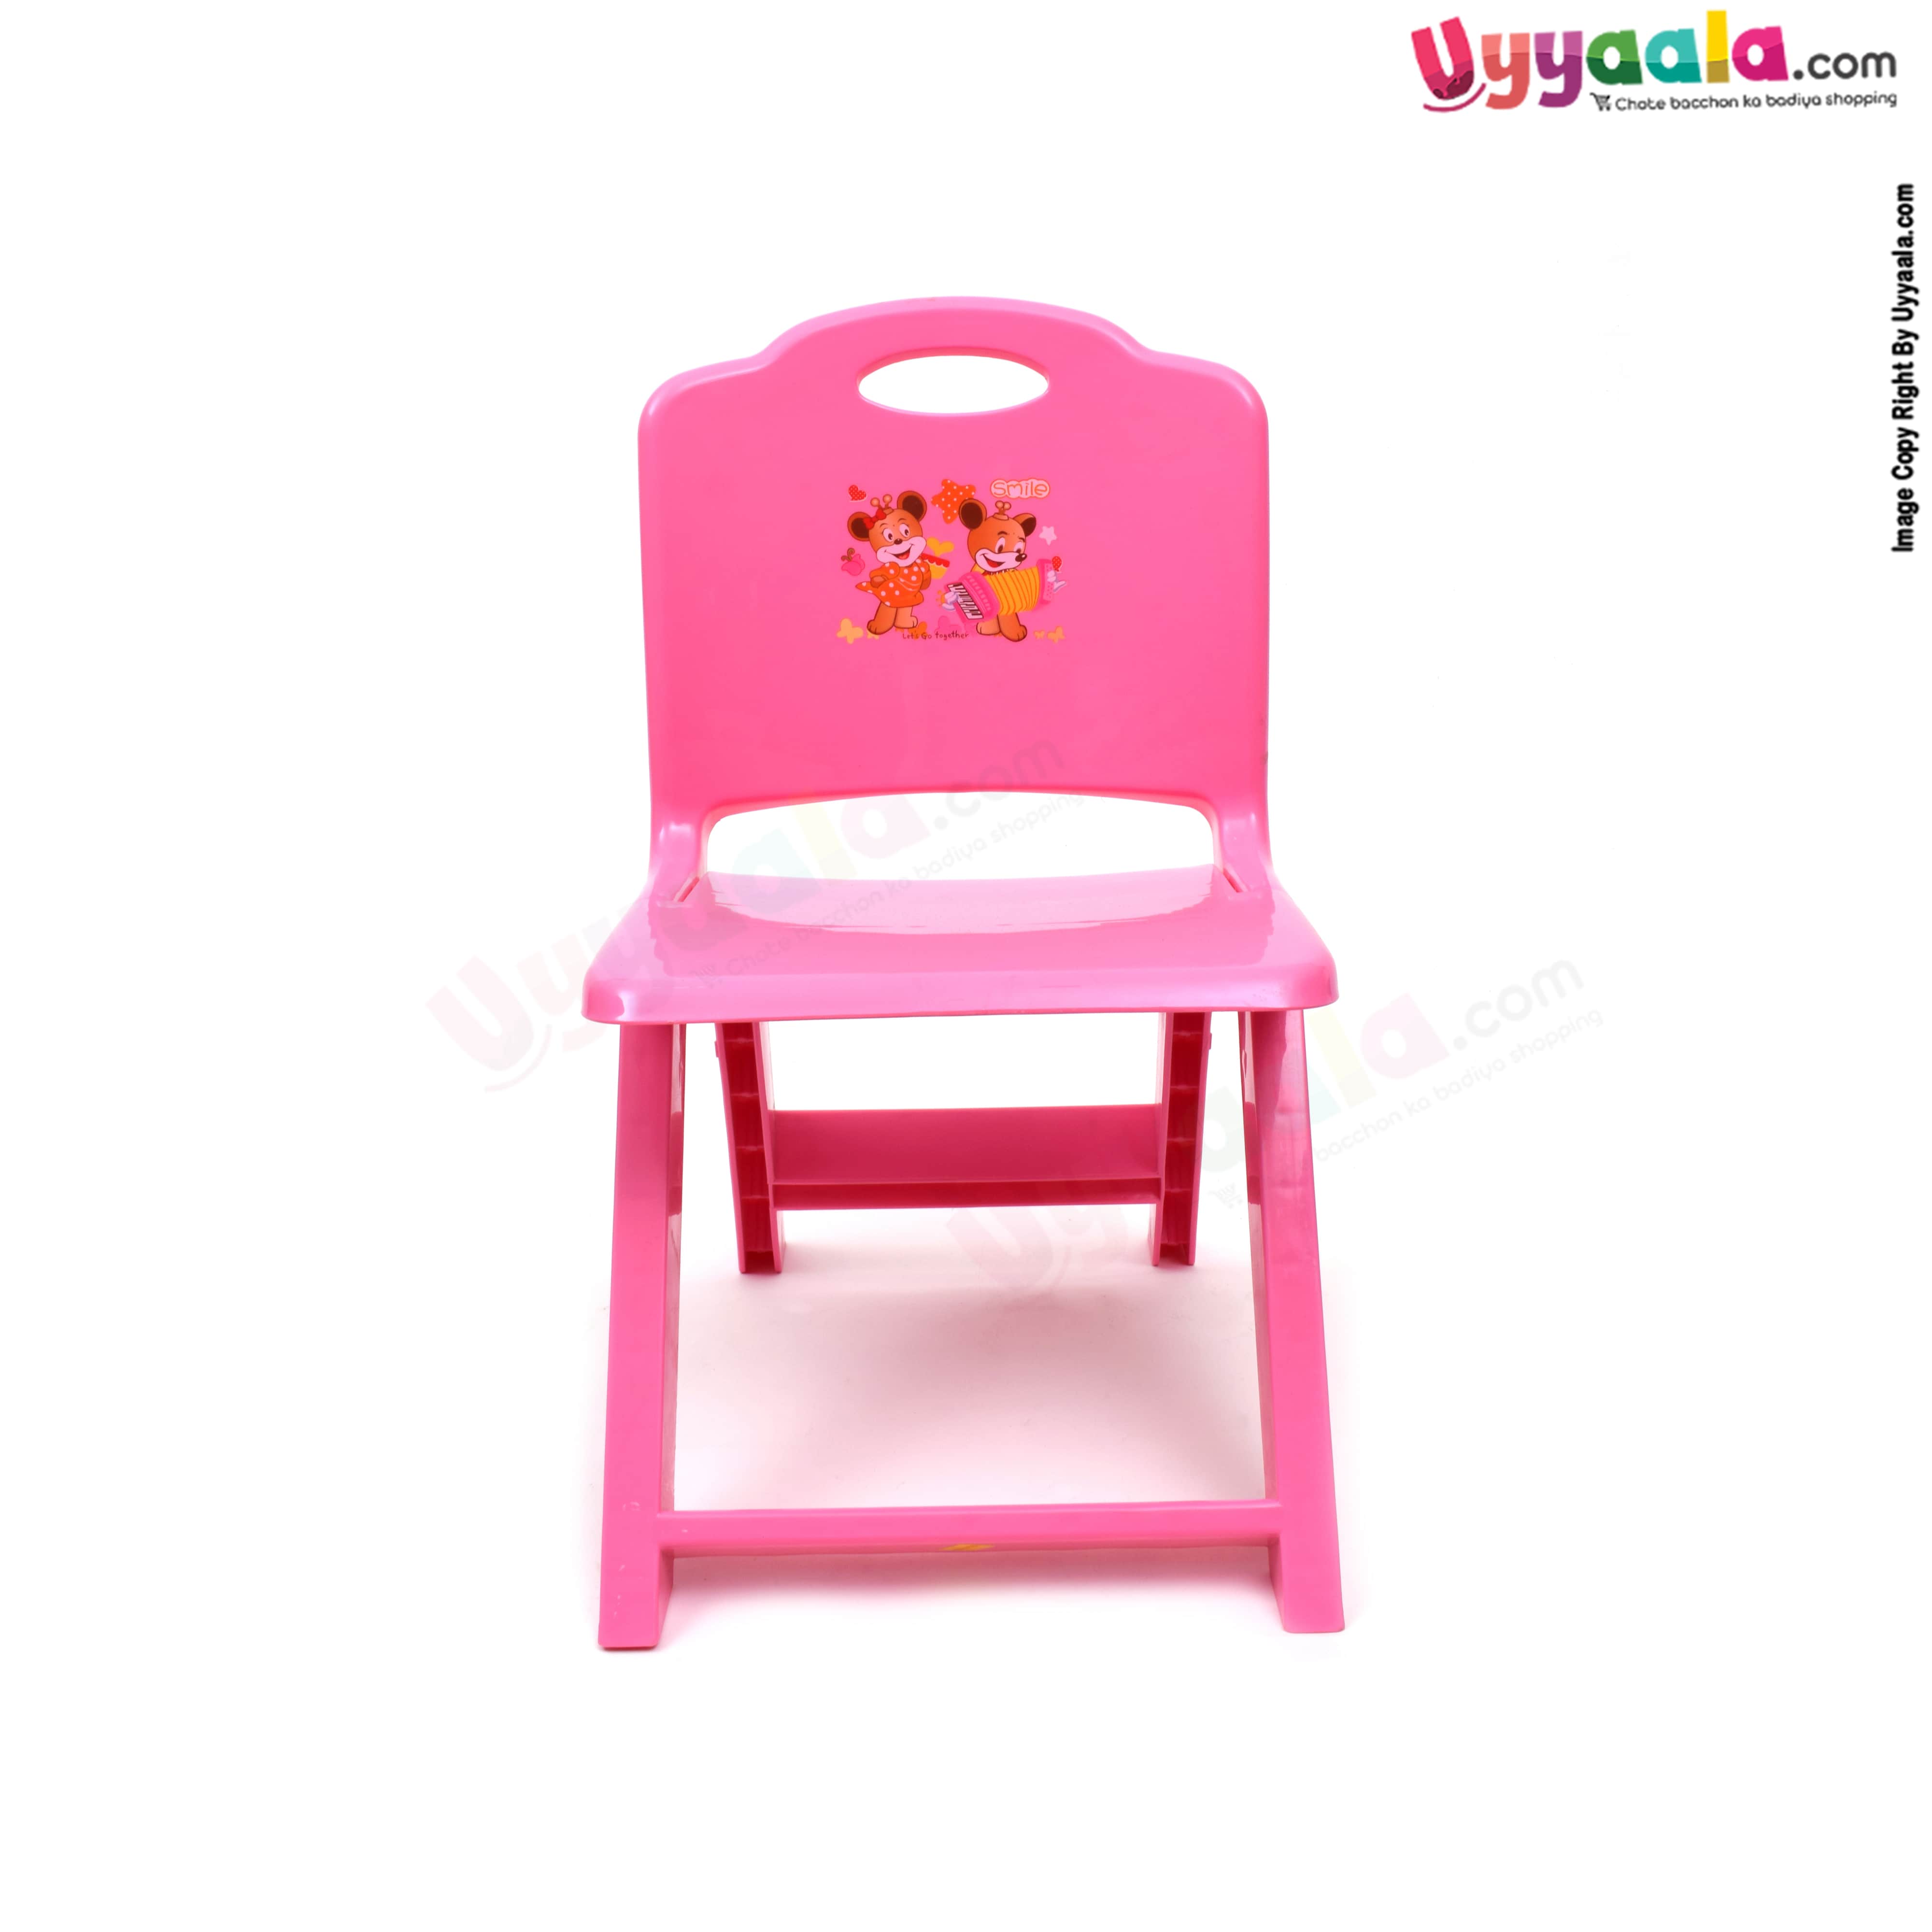 SMILE folding chair for kids micky mouse print - Pink